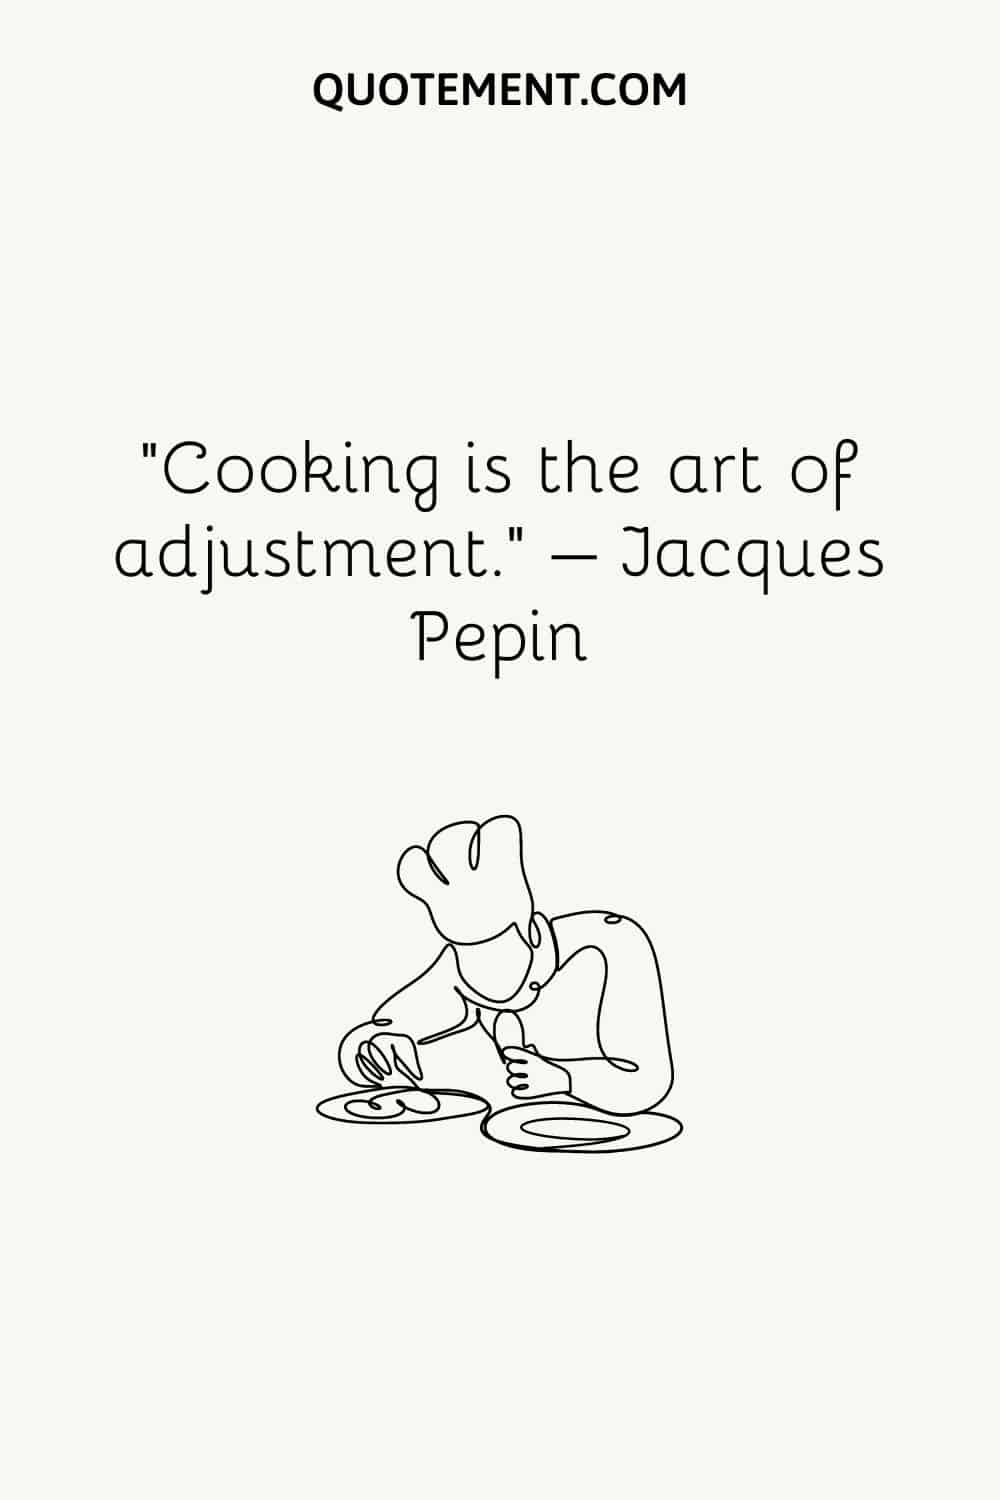 Cooking is the art of adjustment.